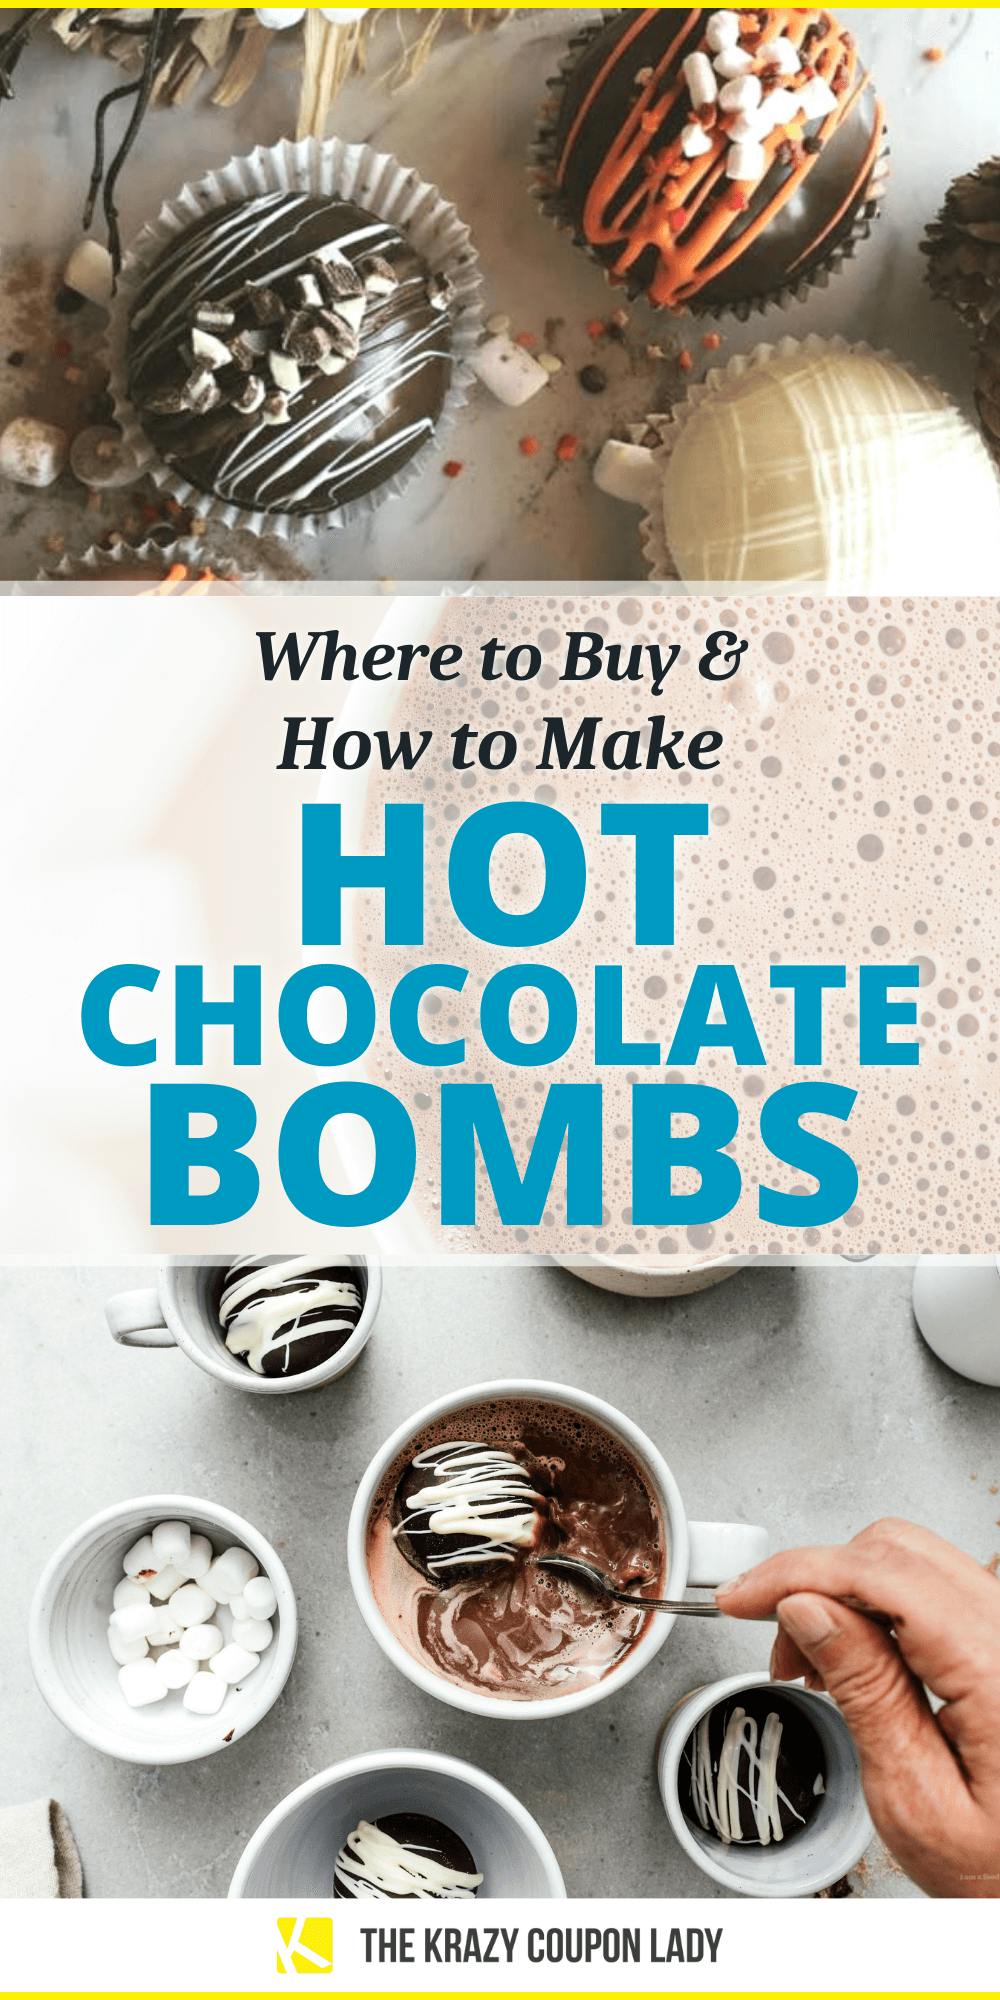 Hot Chocolate Bombs Pinterest The Krazy Coupon Lady 1608393343 1608393343 ?auto=compress,format&fit=max